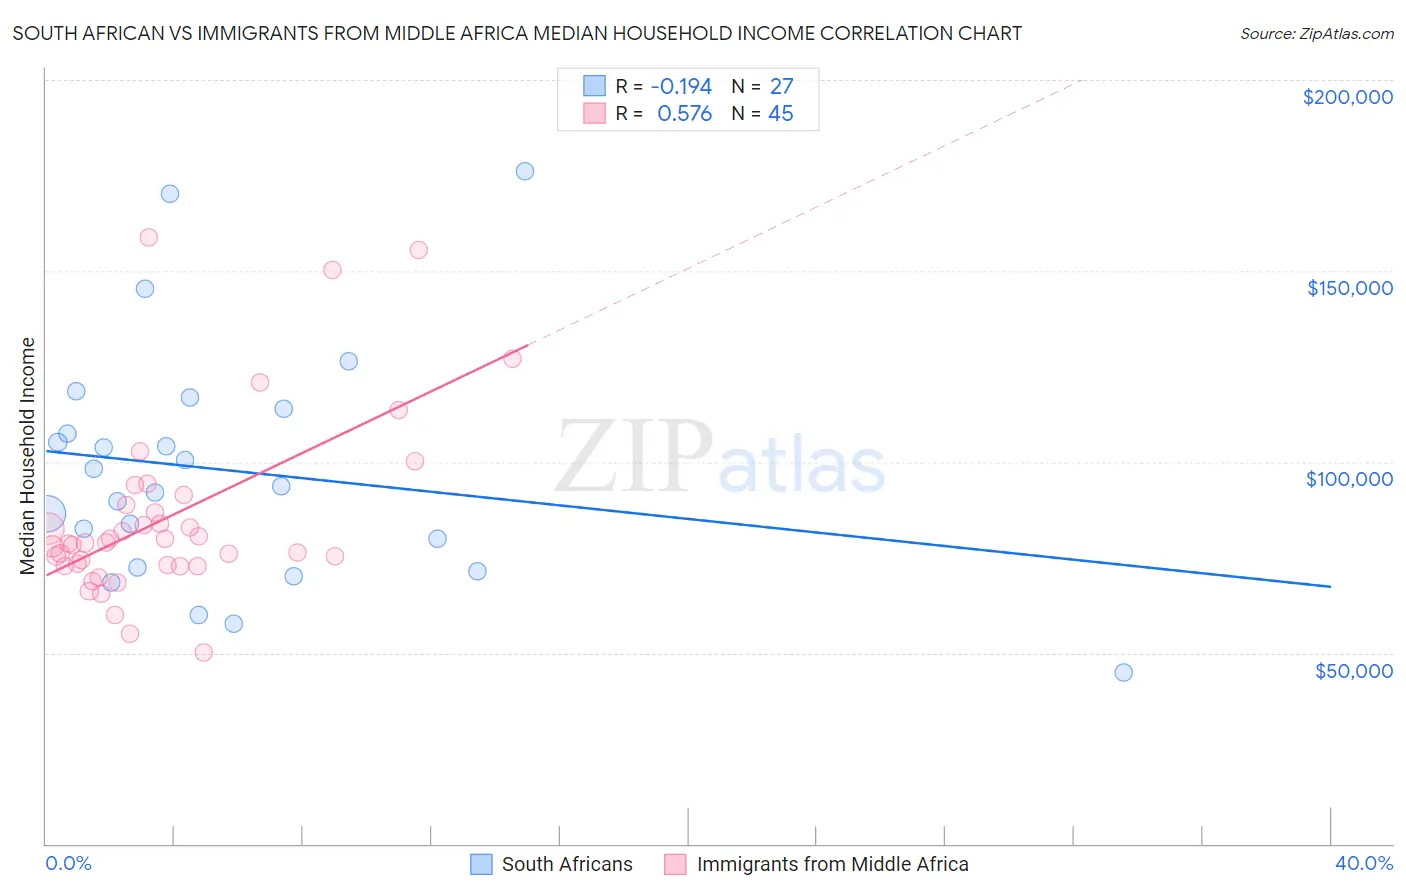 South African vs Immigrants from Middle Africa Median Household Income